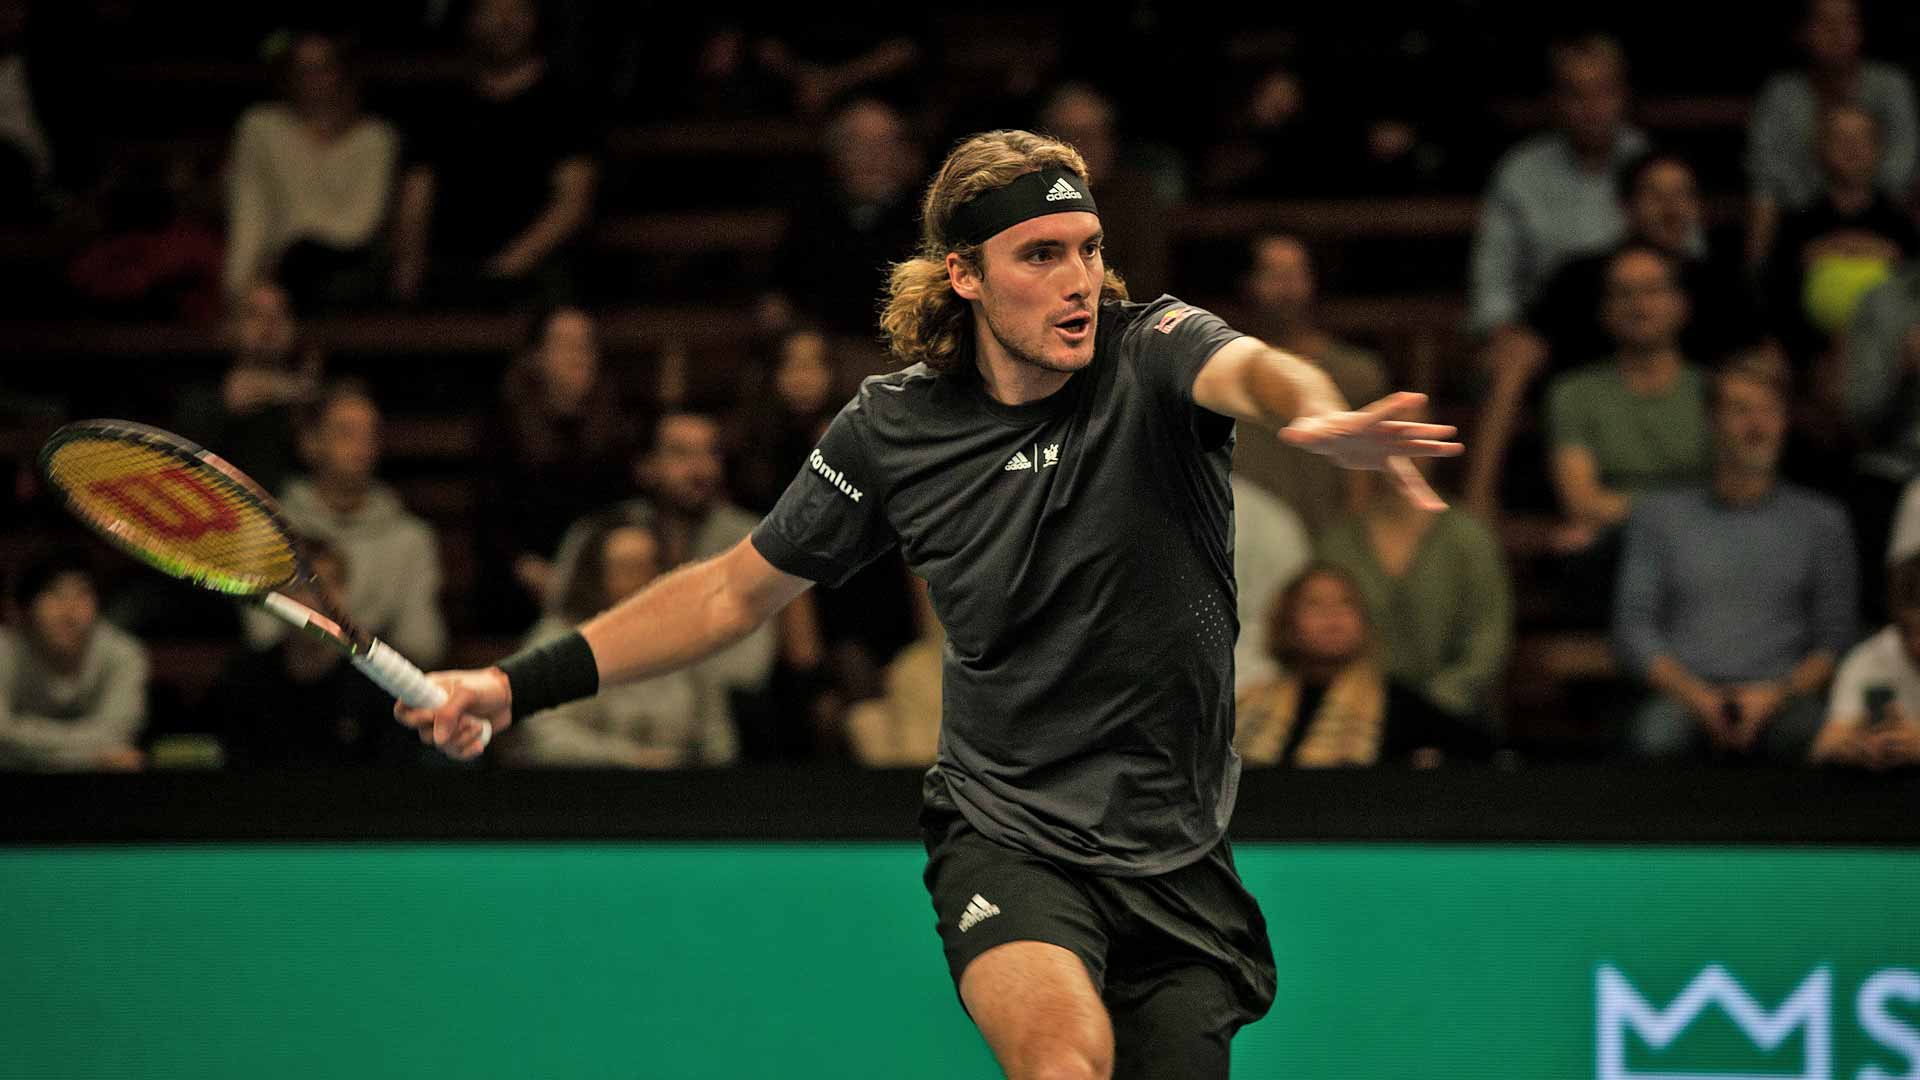 Stefanos Tsitsipas wins two tie-breaks against Maxime Cressy on Wednesday to reach the Stockholm quarter-finals.